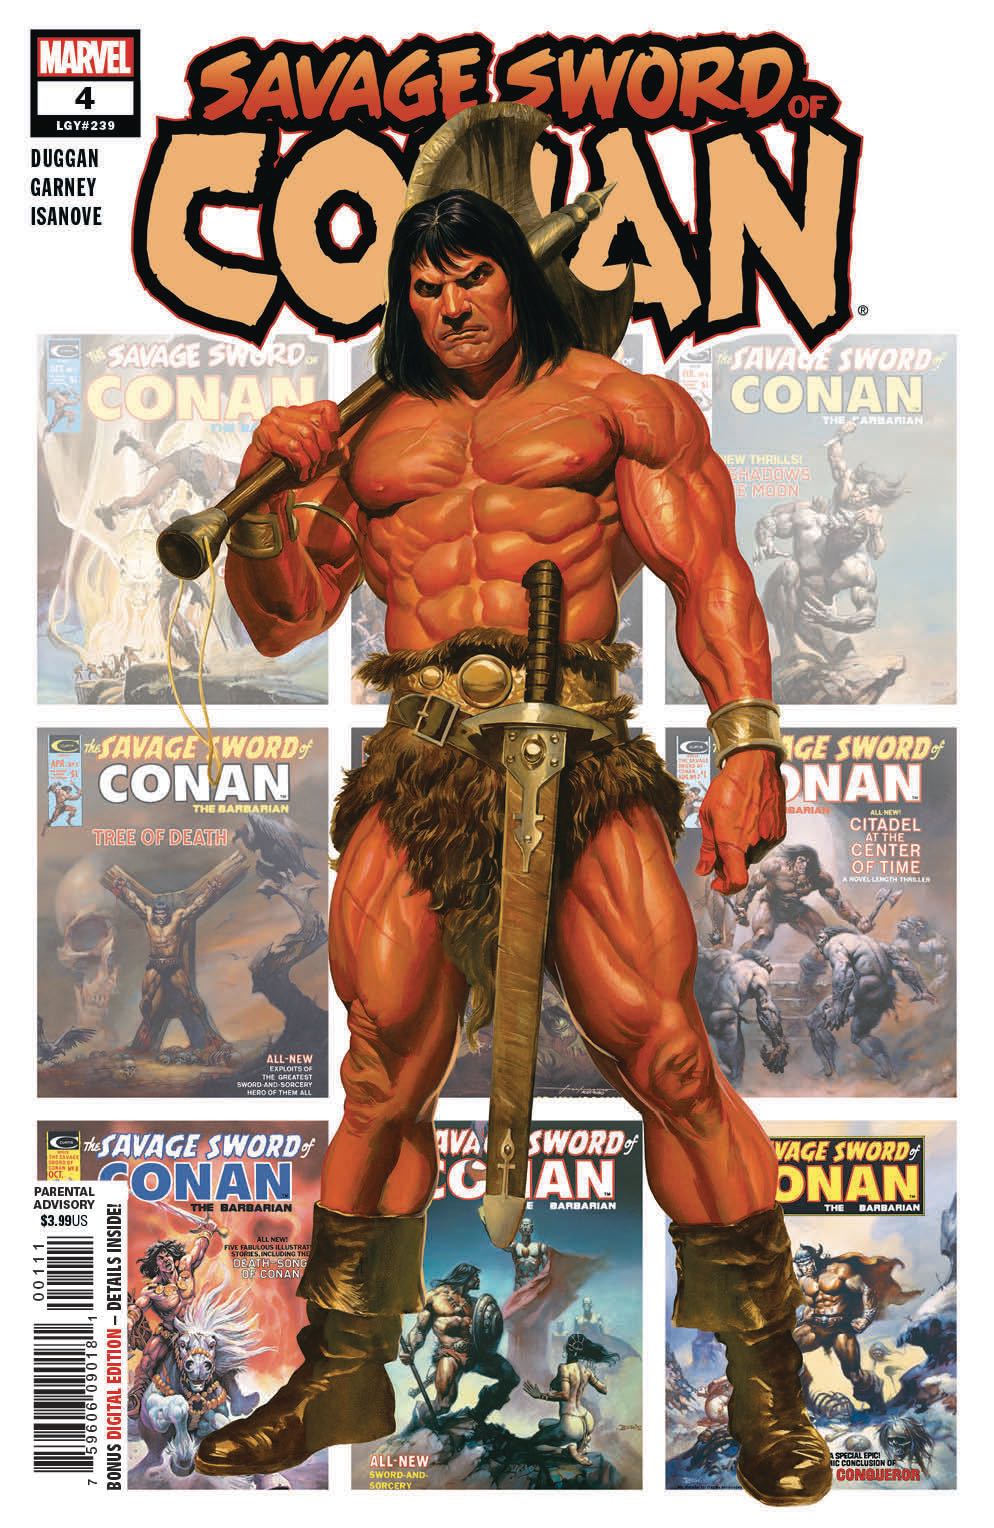 Marvel Preview: The Savage Sword Of Conan #4